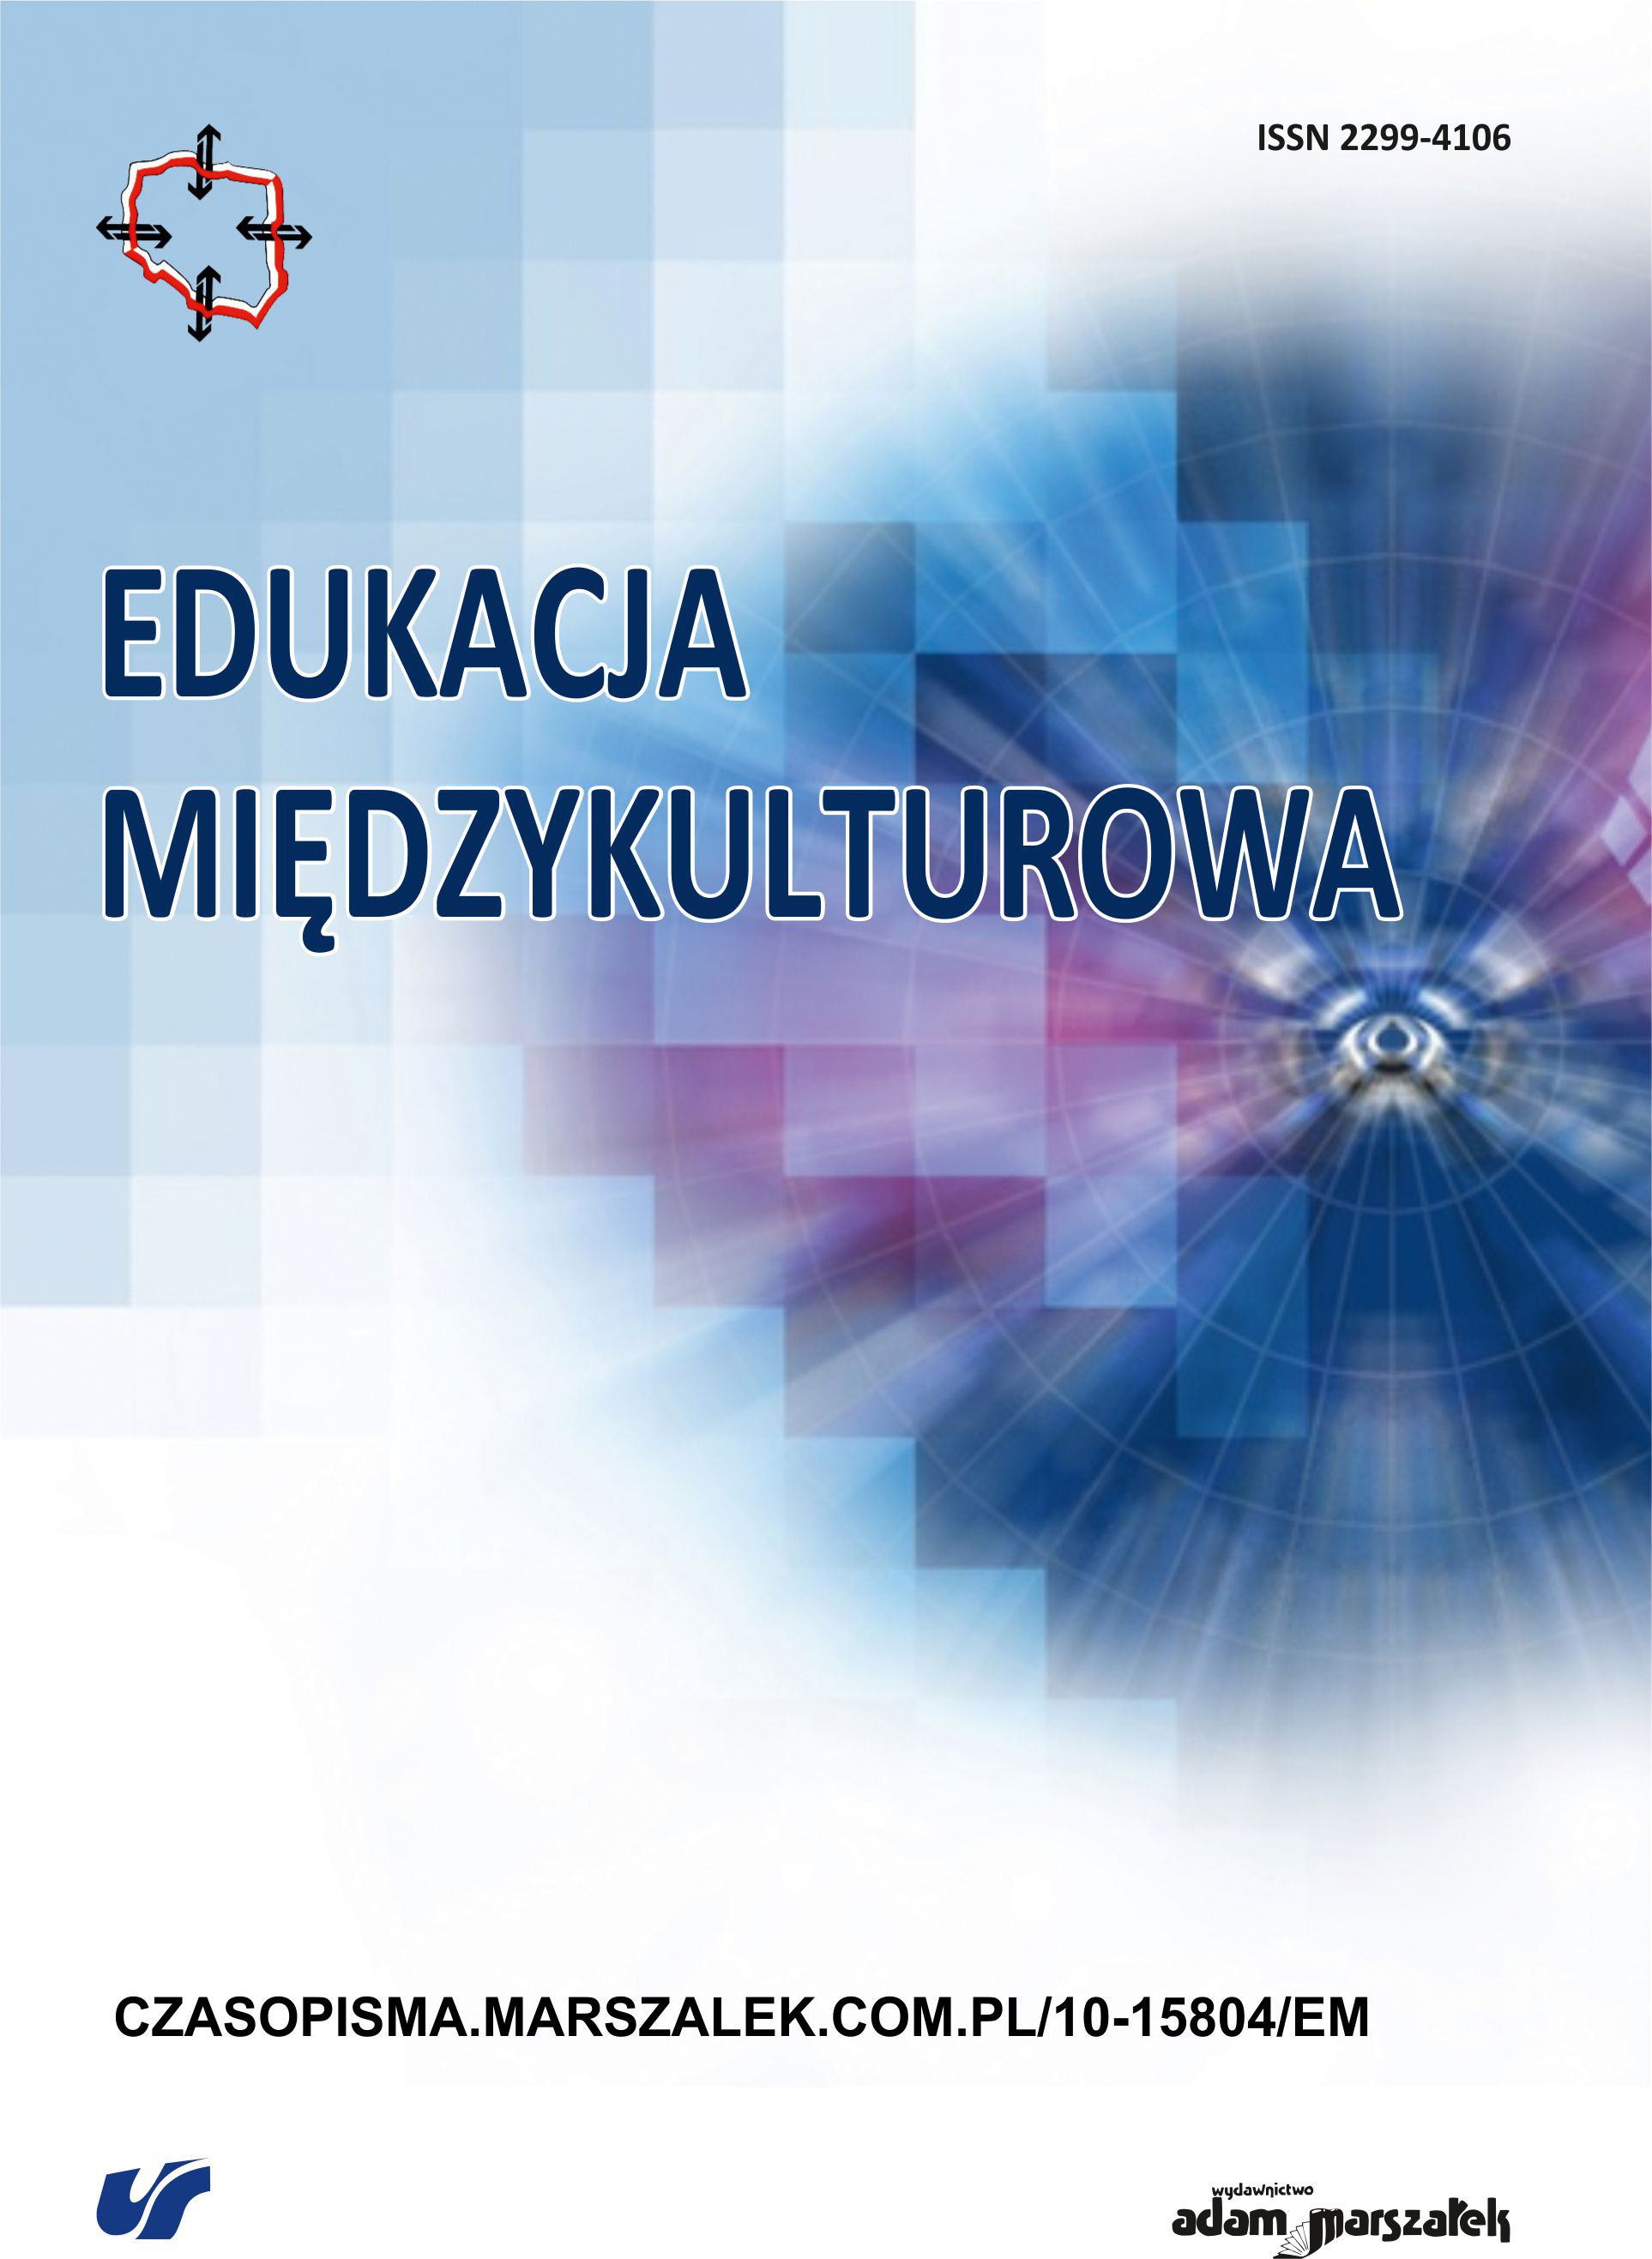 Sexuality education in Poland and in educational systems in selected countries – model solutions and international initiatives Cover Image